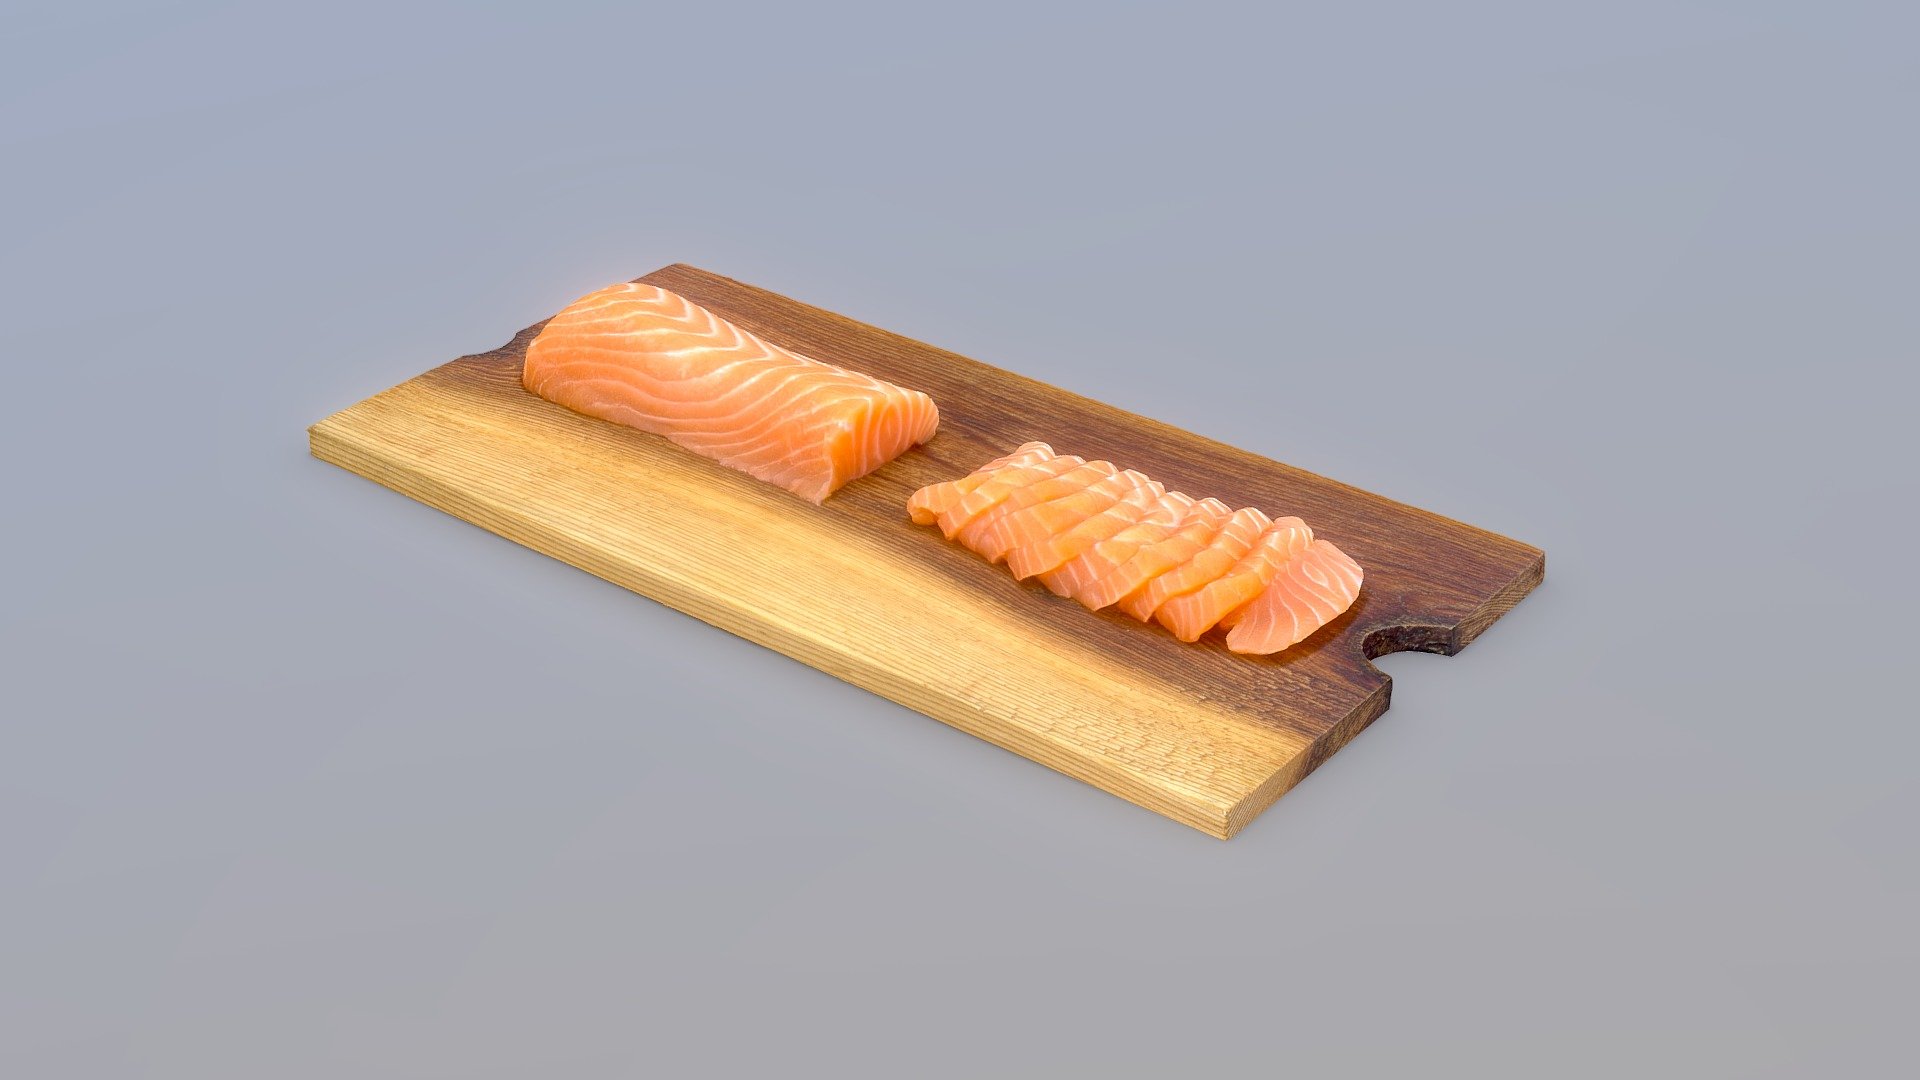 Enjoy sashimi at home.




Follow Zoltanfood on LinkedIn and  Instagram

Explore the Food Metaverse in AR/VR on Zoltanfood.com

Want to show support? Become a patron on Patreon
 - Sushi Grade Salmon - Buy Royalty Free 3D model by Zoltanfood 3d model